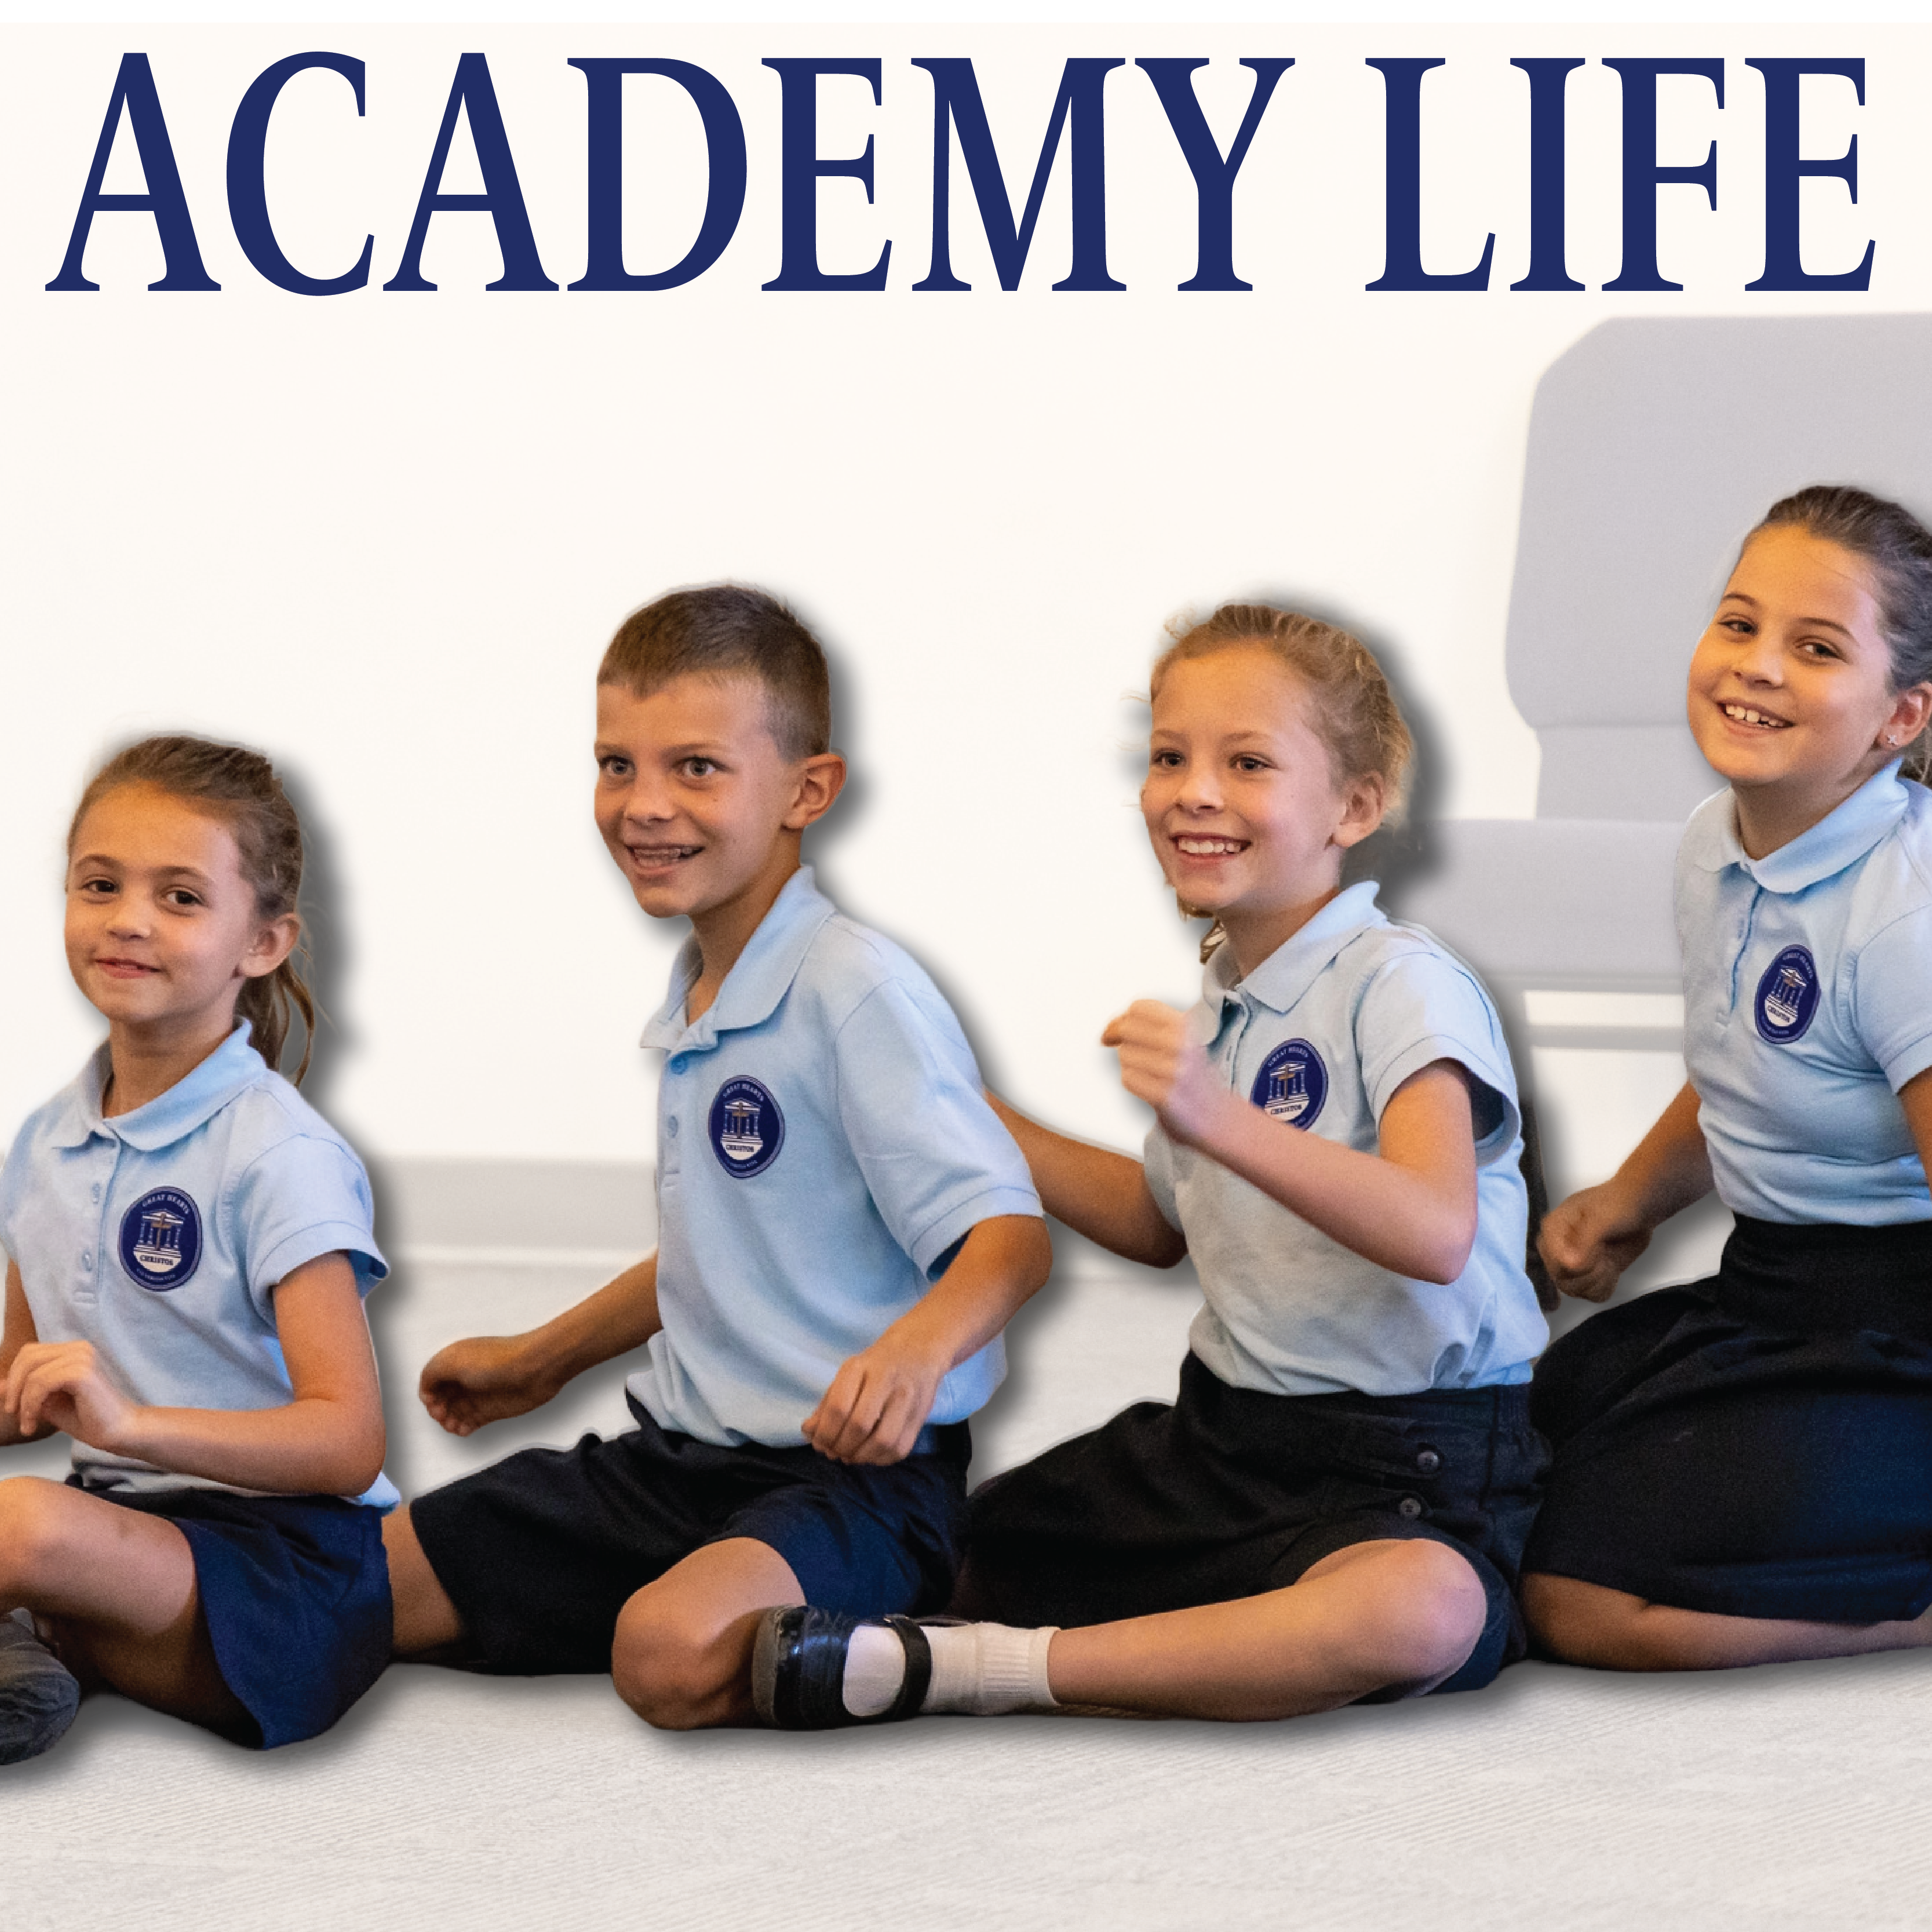 Academy Life at Great Hearts Christos